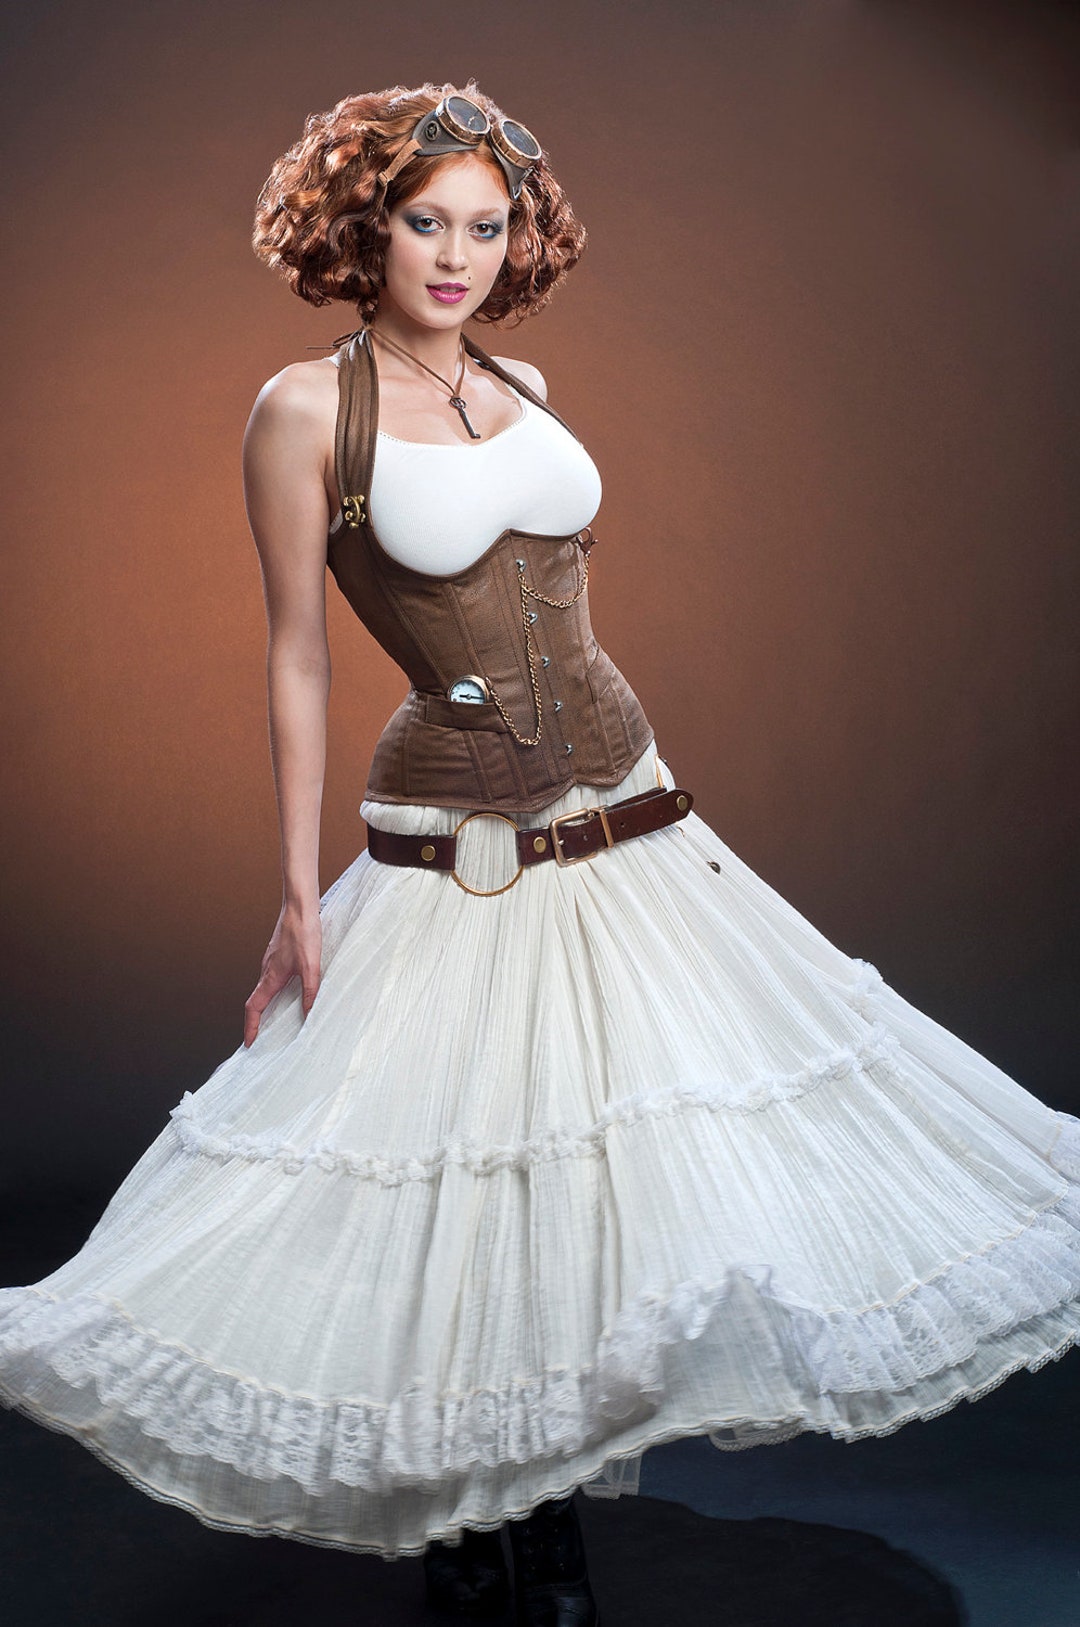 Steampunk Brown Brocade Overbust Corset with Detachable Jacket - Medieval  Collectibles